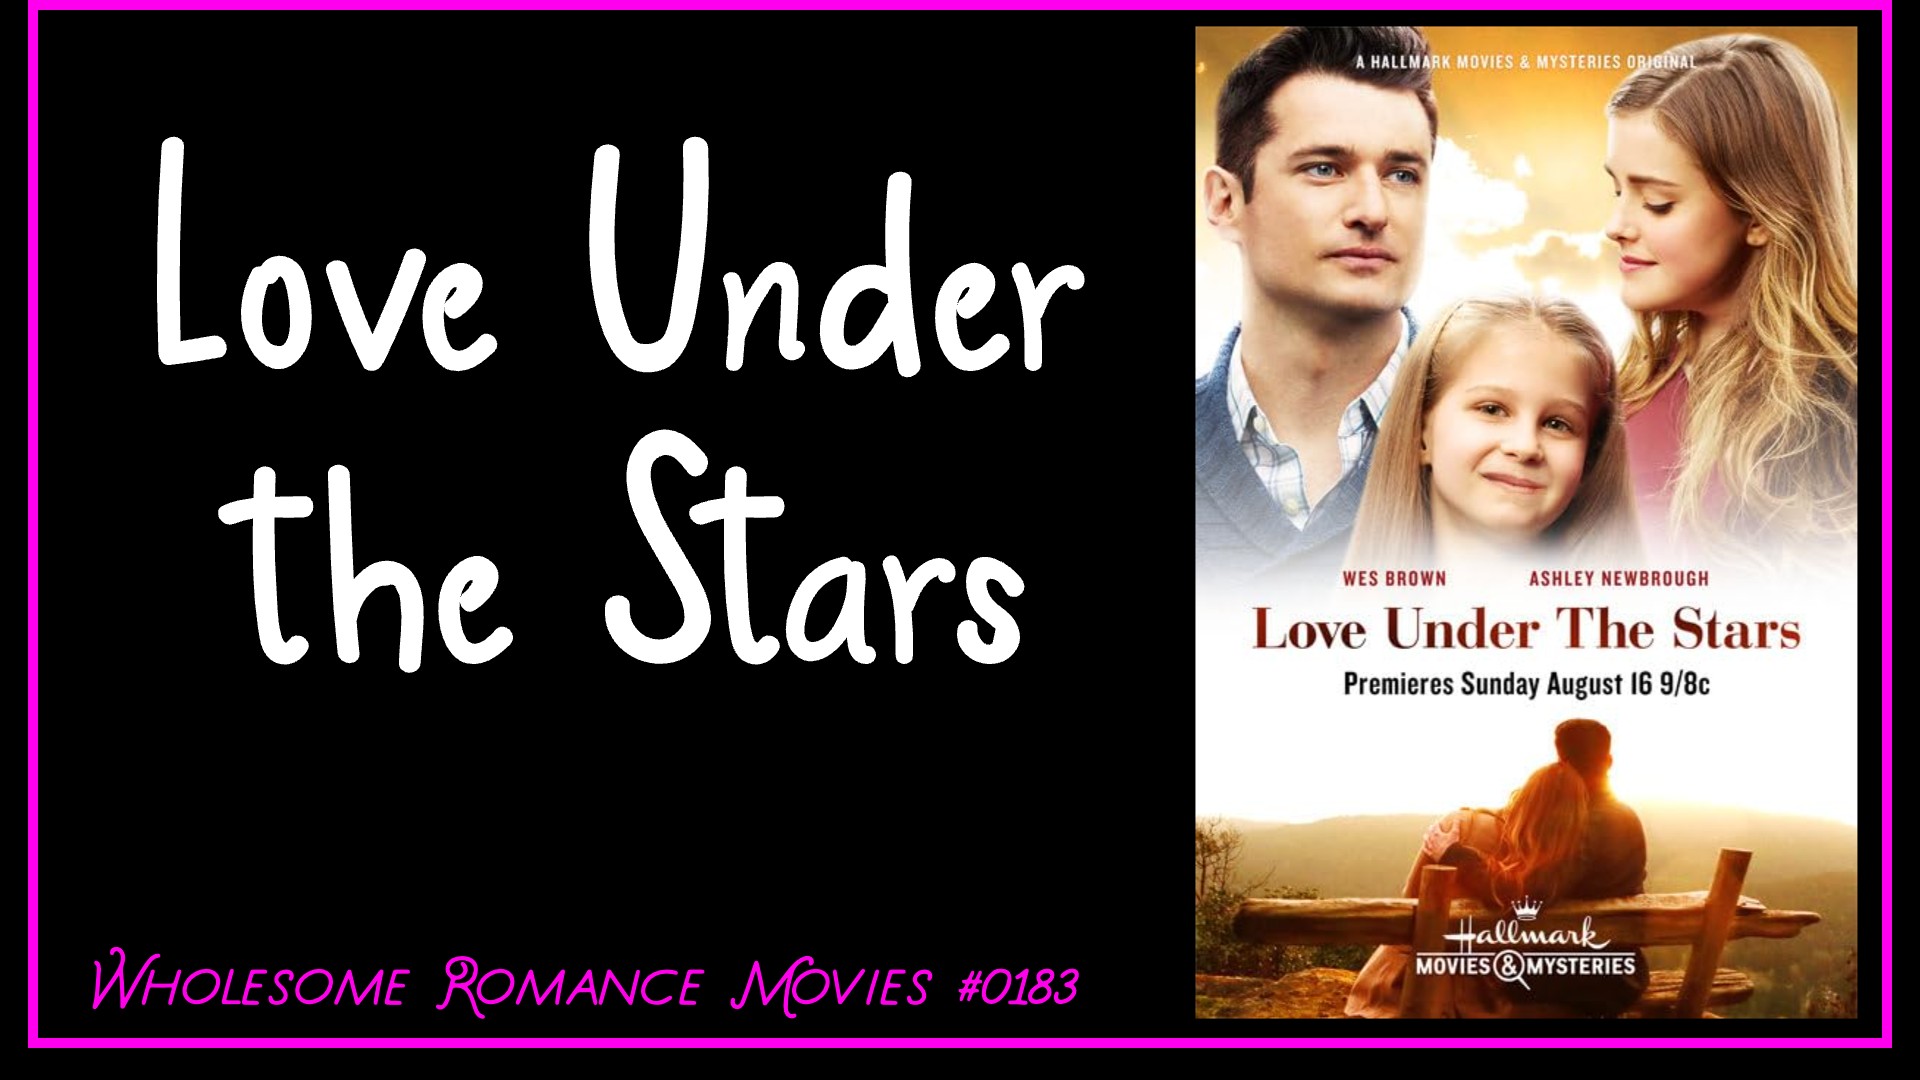 Love Under the Stars (2015) WRM Review